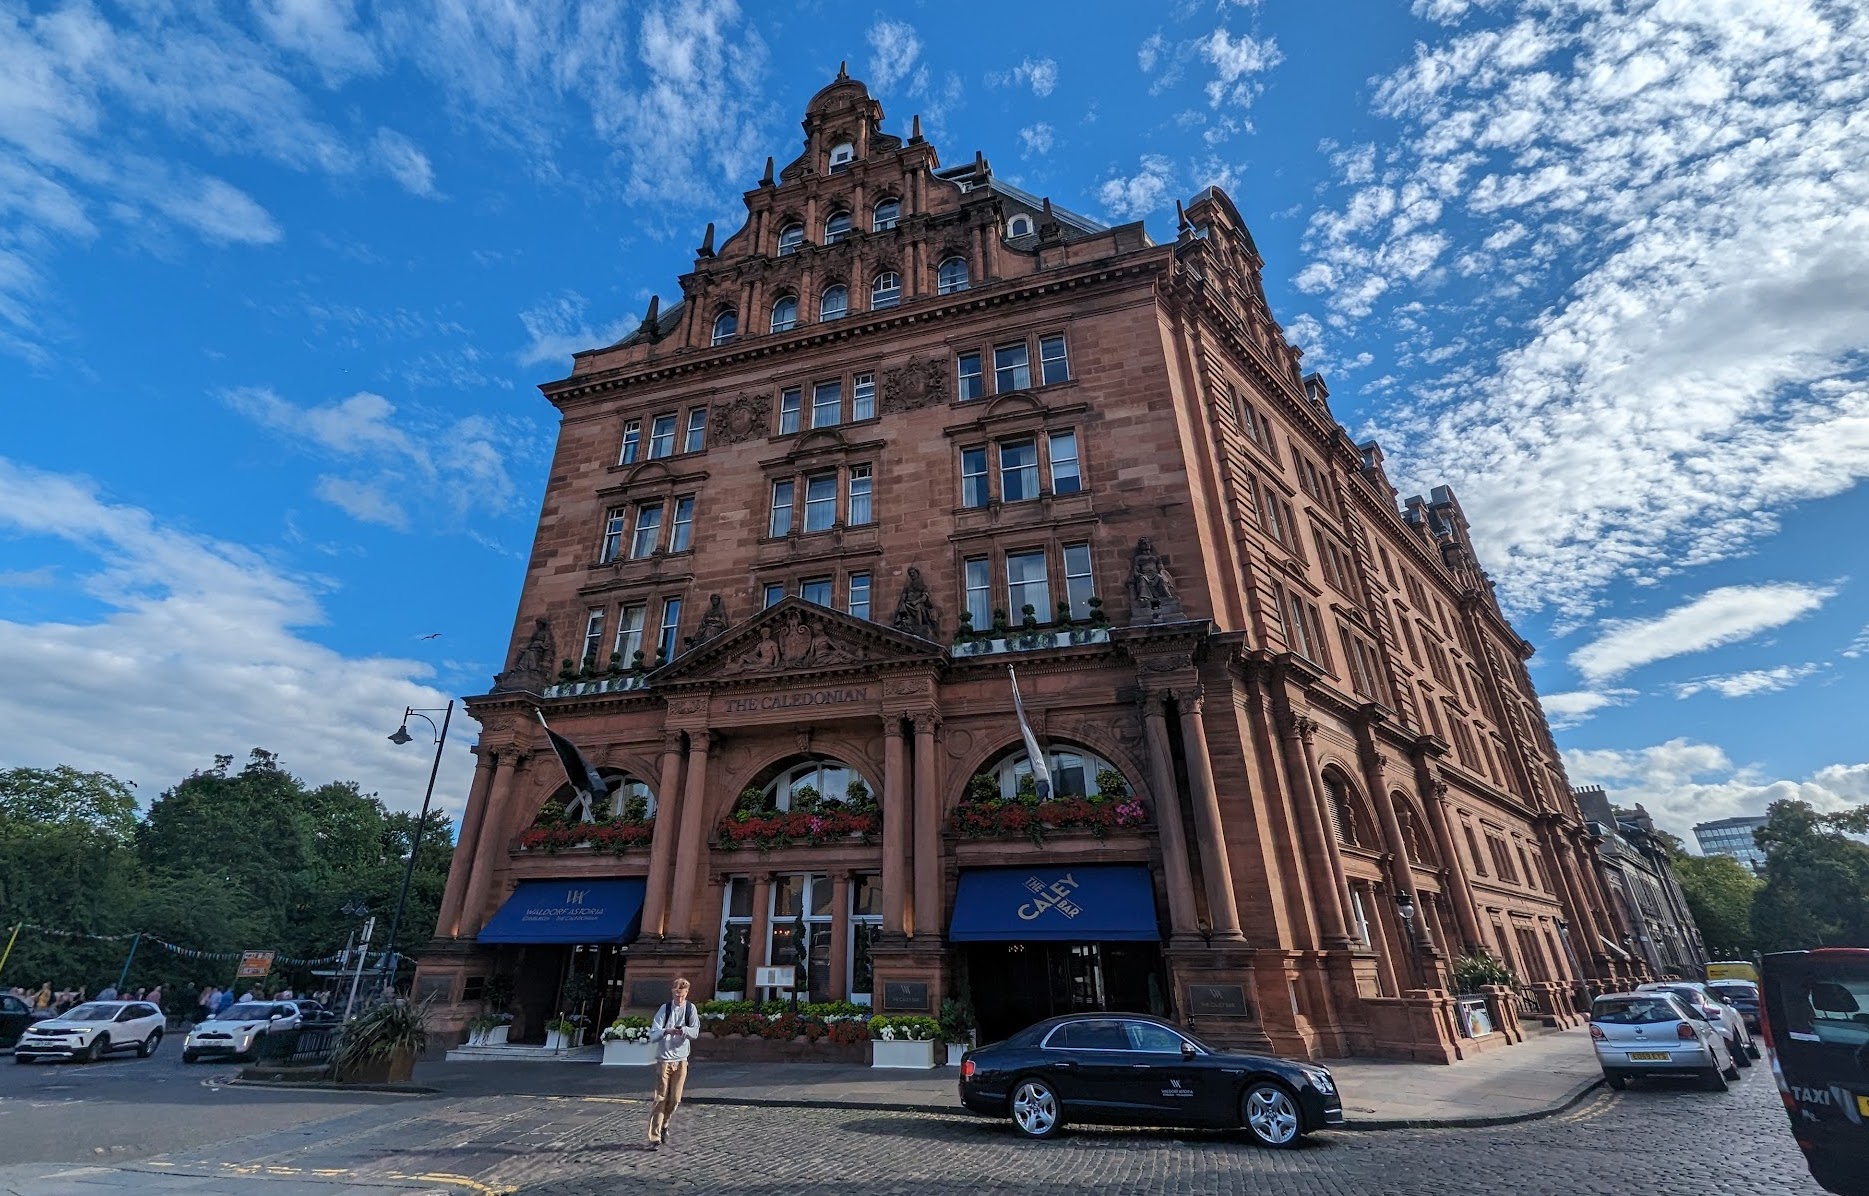 The Caledonian Hotel to undergo £35m makeover